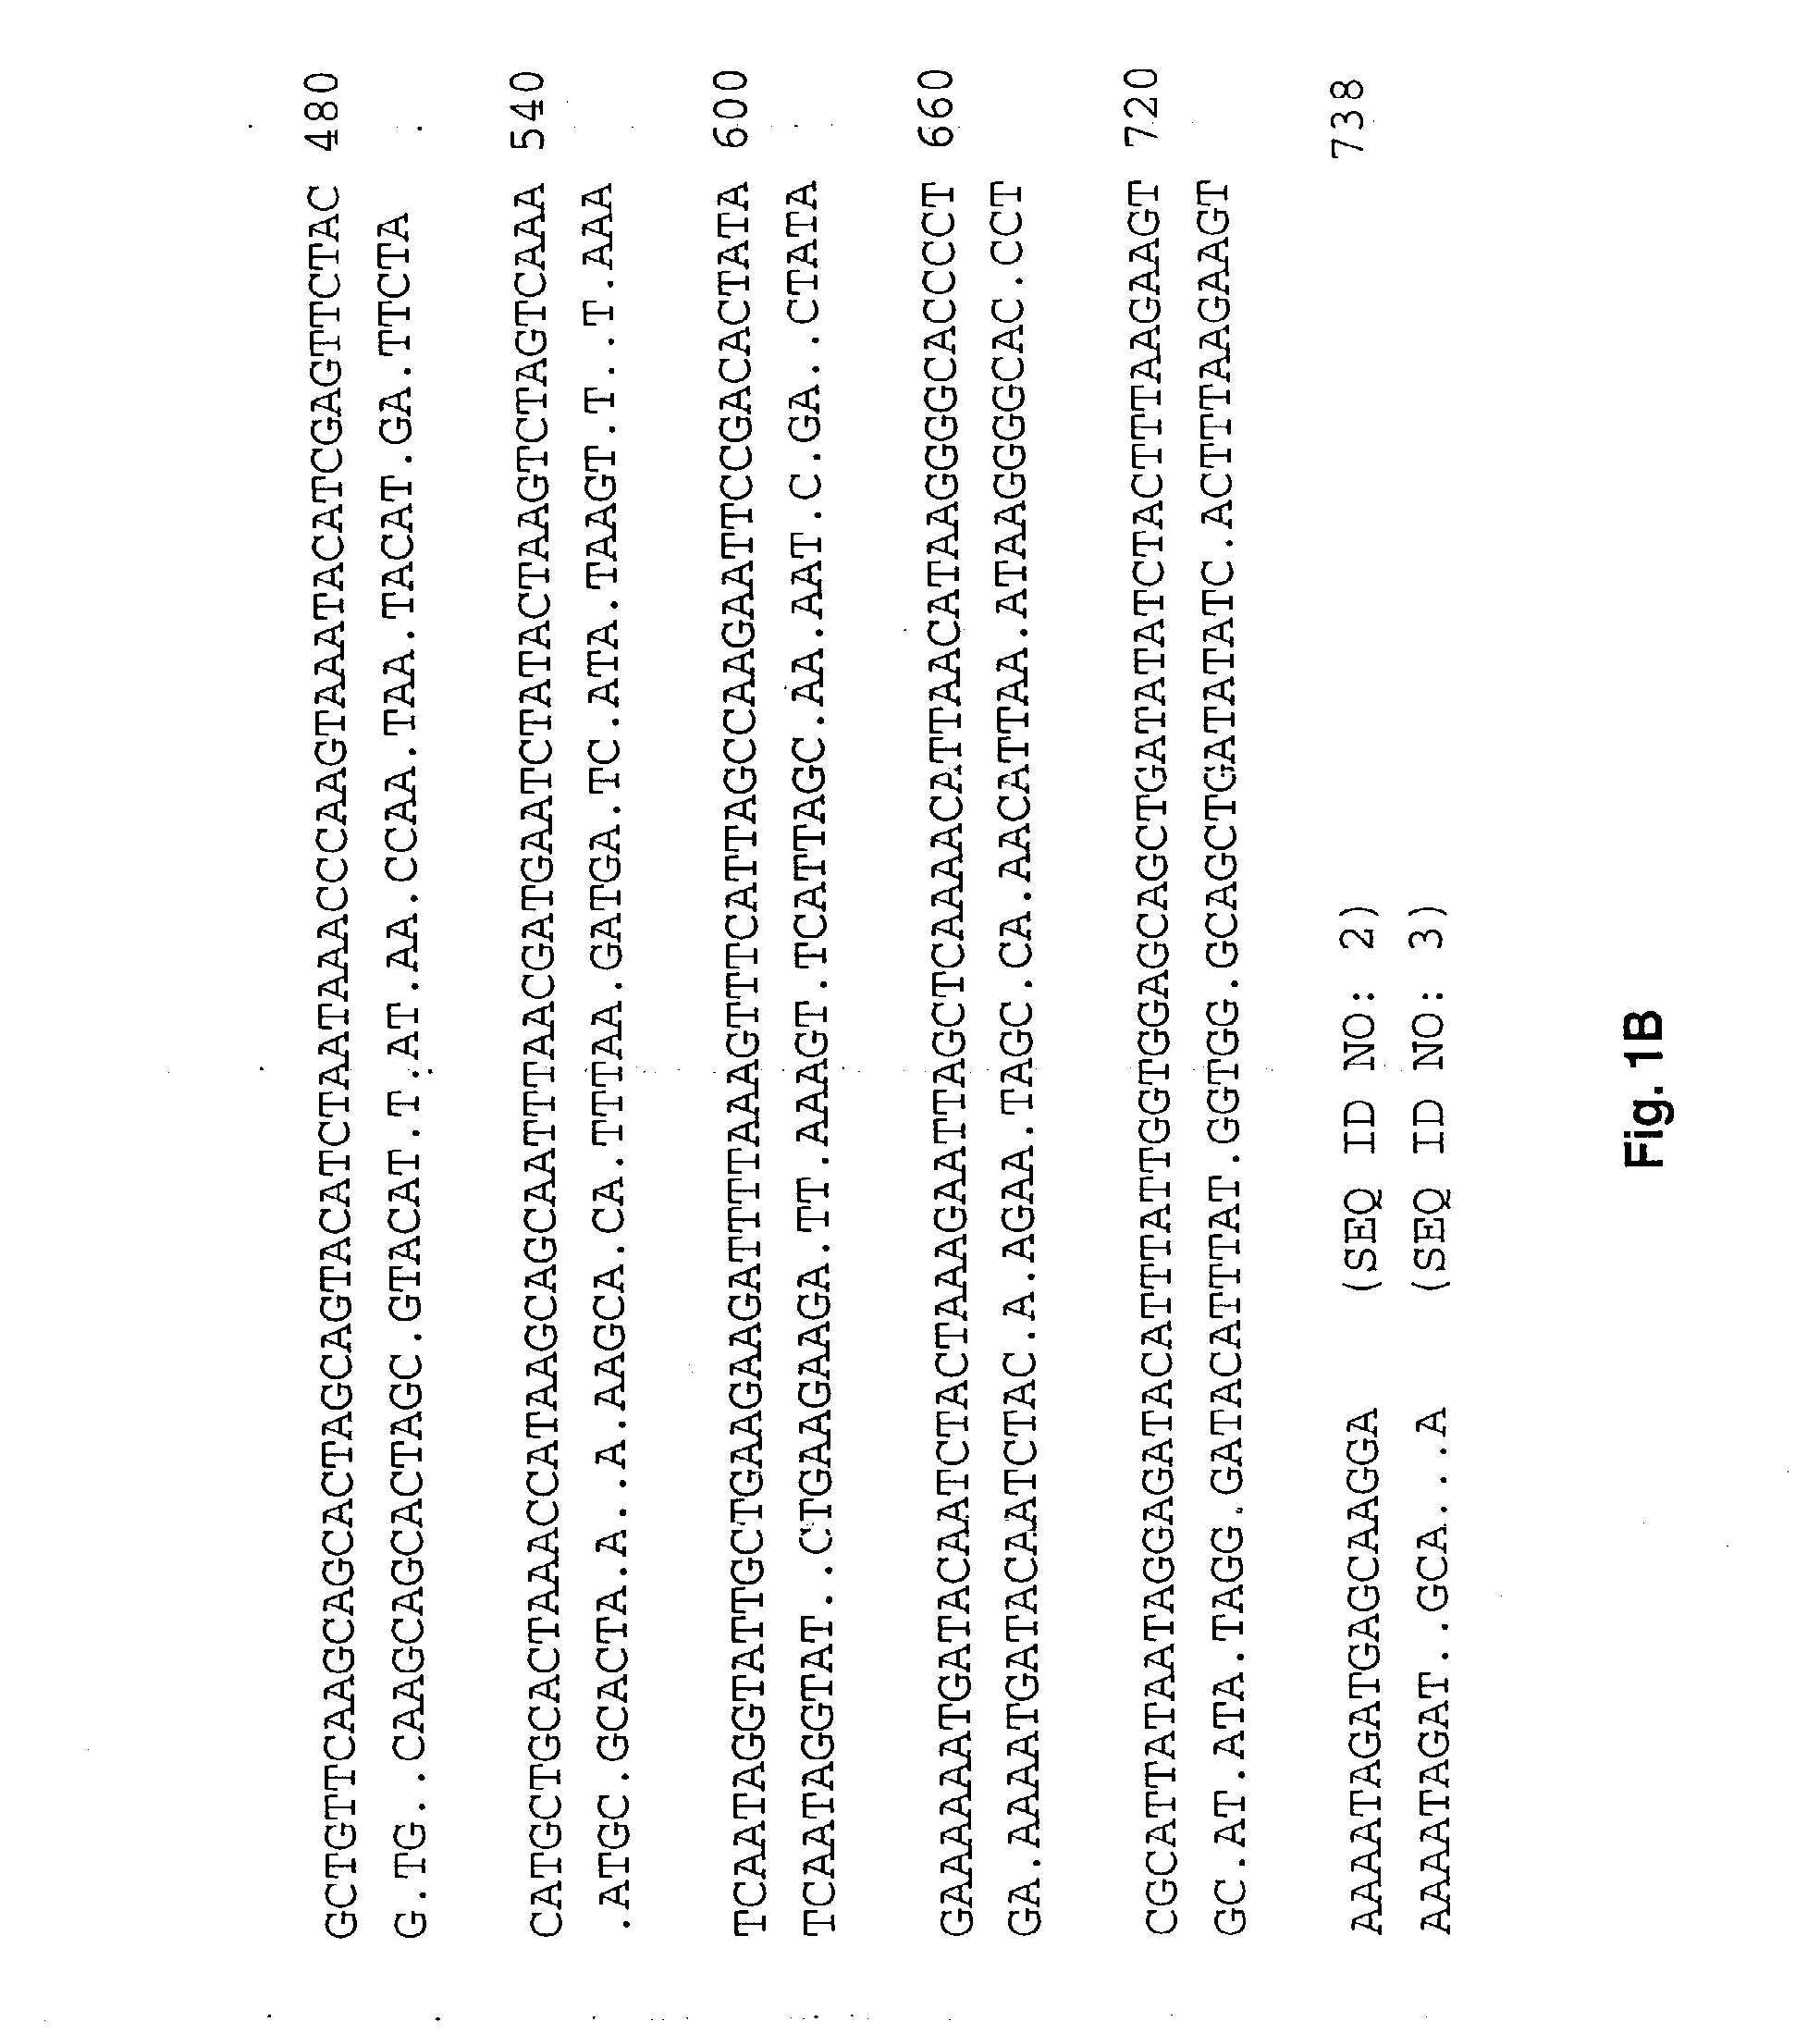 Ehrlichia disulfide bond formation proteins and uses thereof